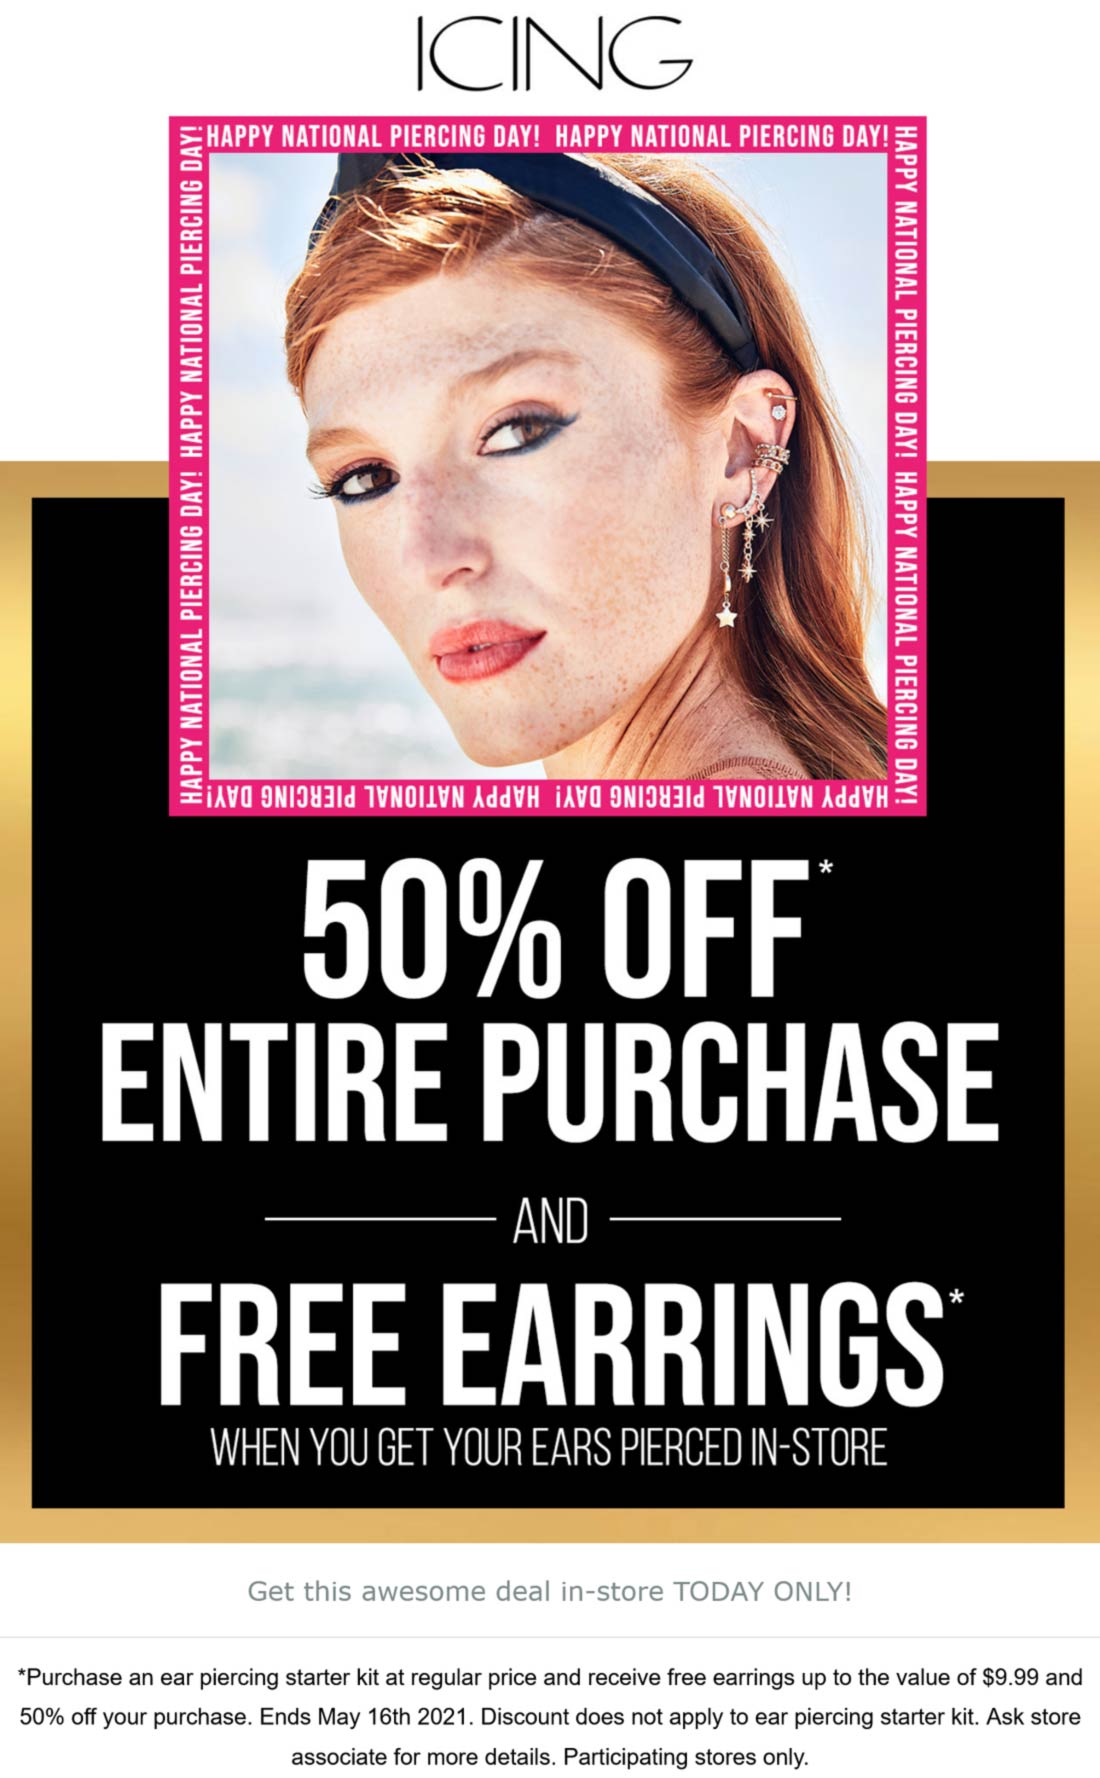 Icing stores Coupon  50% off everything with a piercing today at Icing #icing 